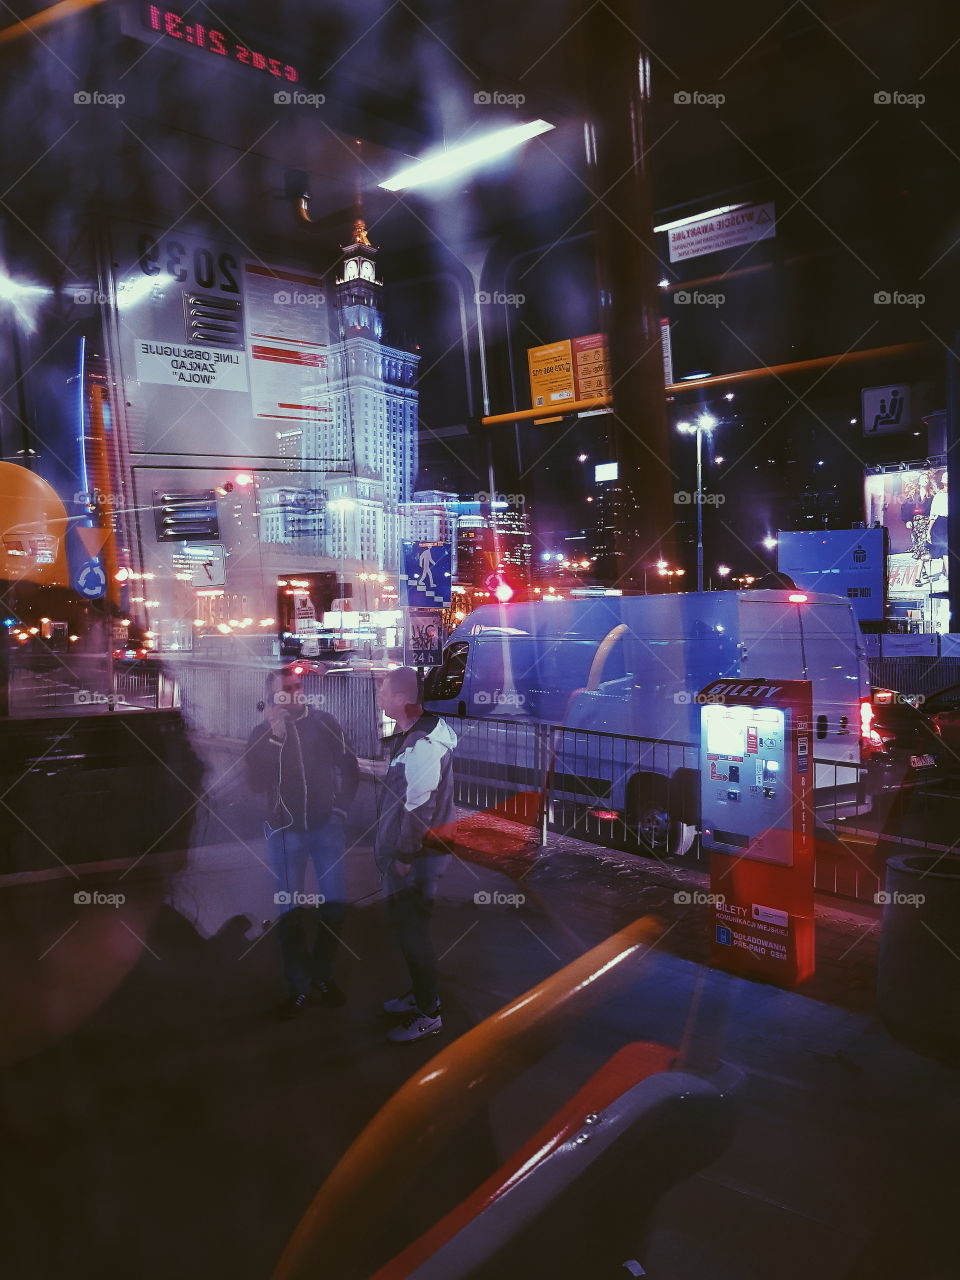 Reflection of the Interior of a tram at night with the city of Warsaw in the background. Purple neon colors.